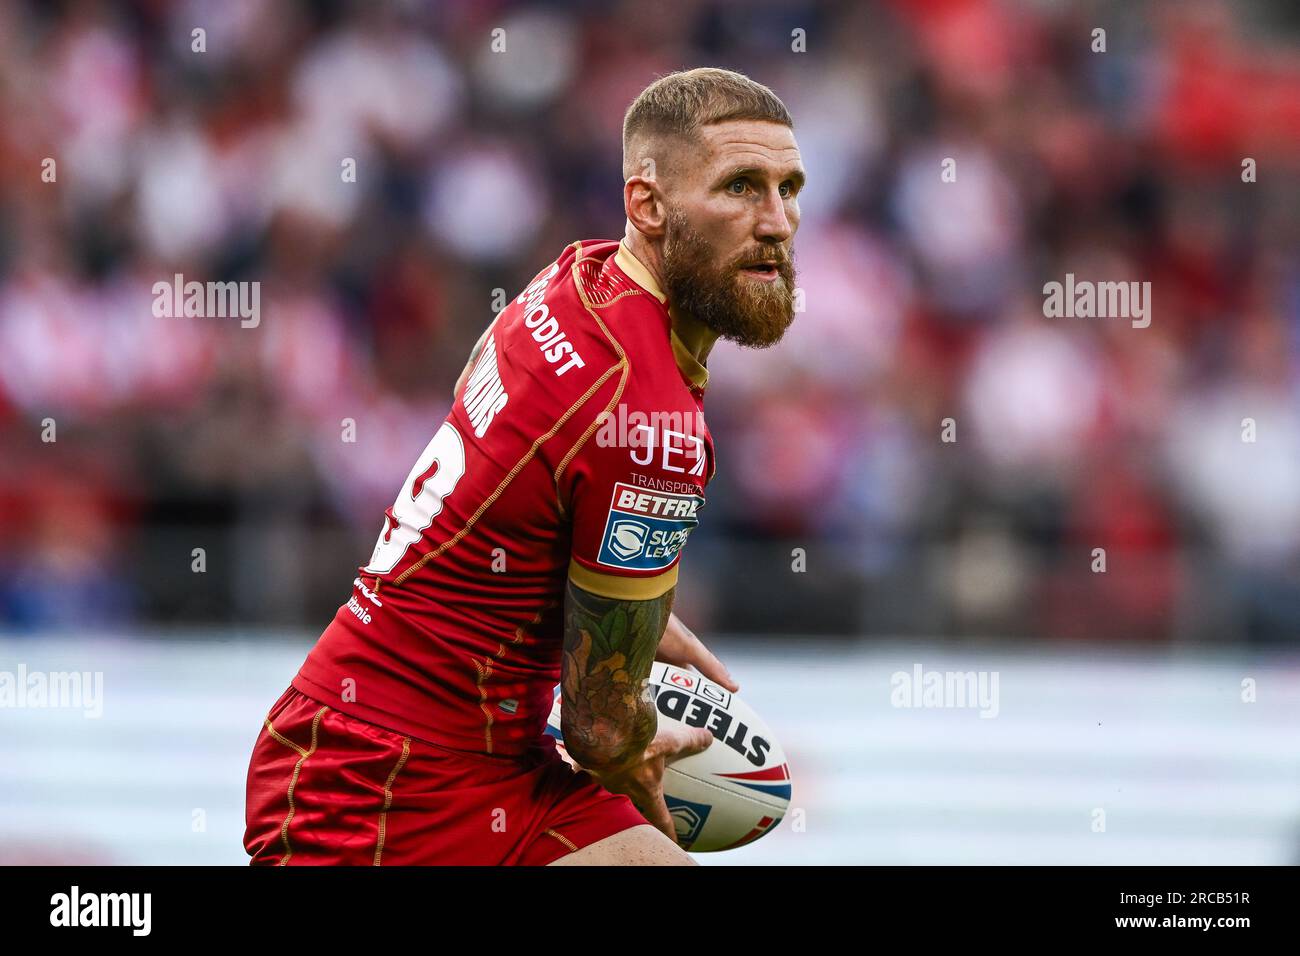 Sam Tomkins #29 of Catalans Dragons in action during the Betfred Super League Round 19 match St Helens vs Catalans Dragons at Totally Wicked Stadium, St Helens, United Kingdom, 13th July 2023 (Photo by Craig Thomas/News Images) in, on 7/13/2023. (Photo by Craig Thomas/News Images/Sipa USA) Credit: Sipa USA/Alamy Live News Stock Photo